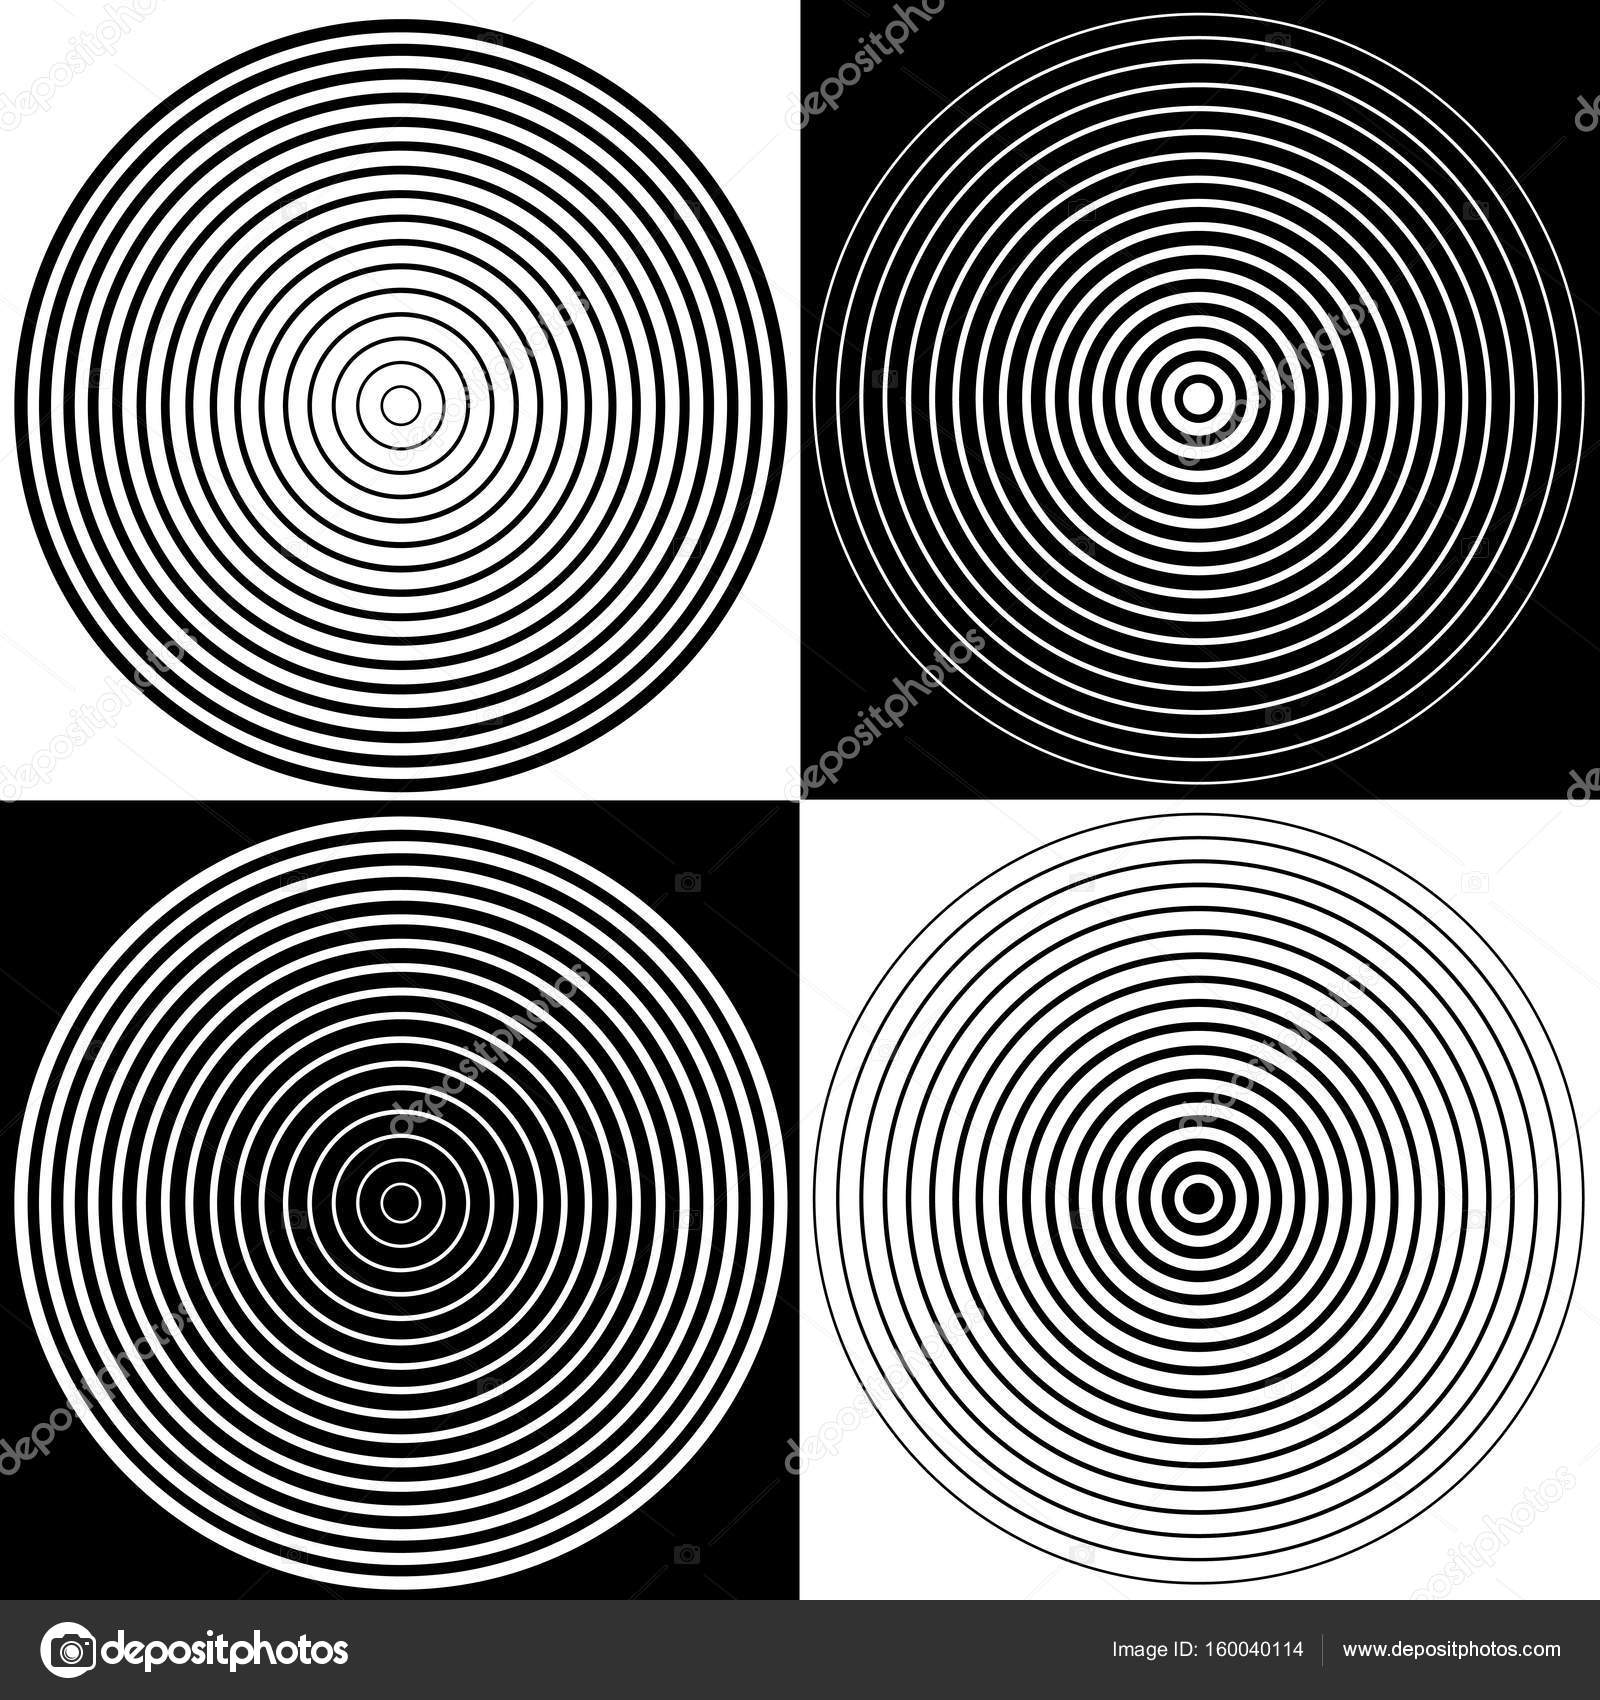 Abstract Art Black And White Patterns Spiral Designs